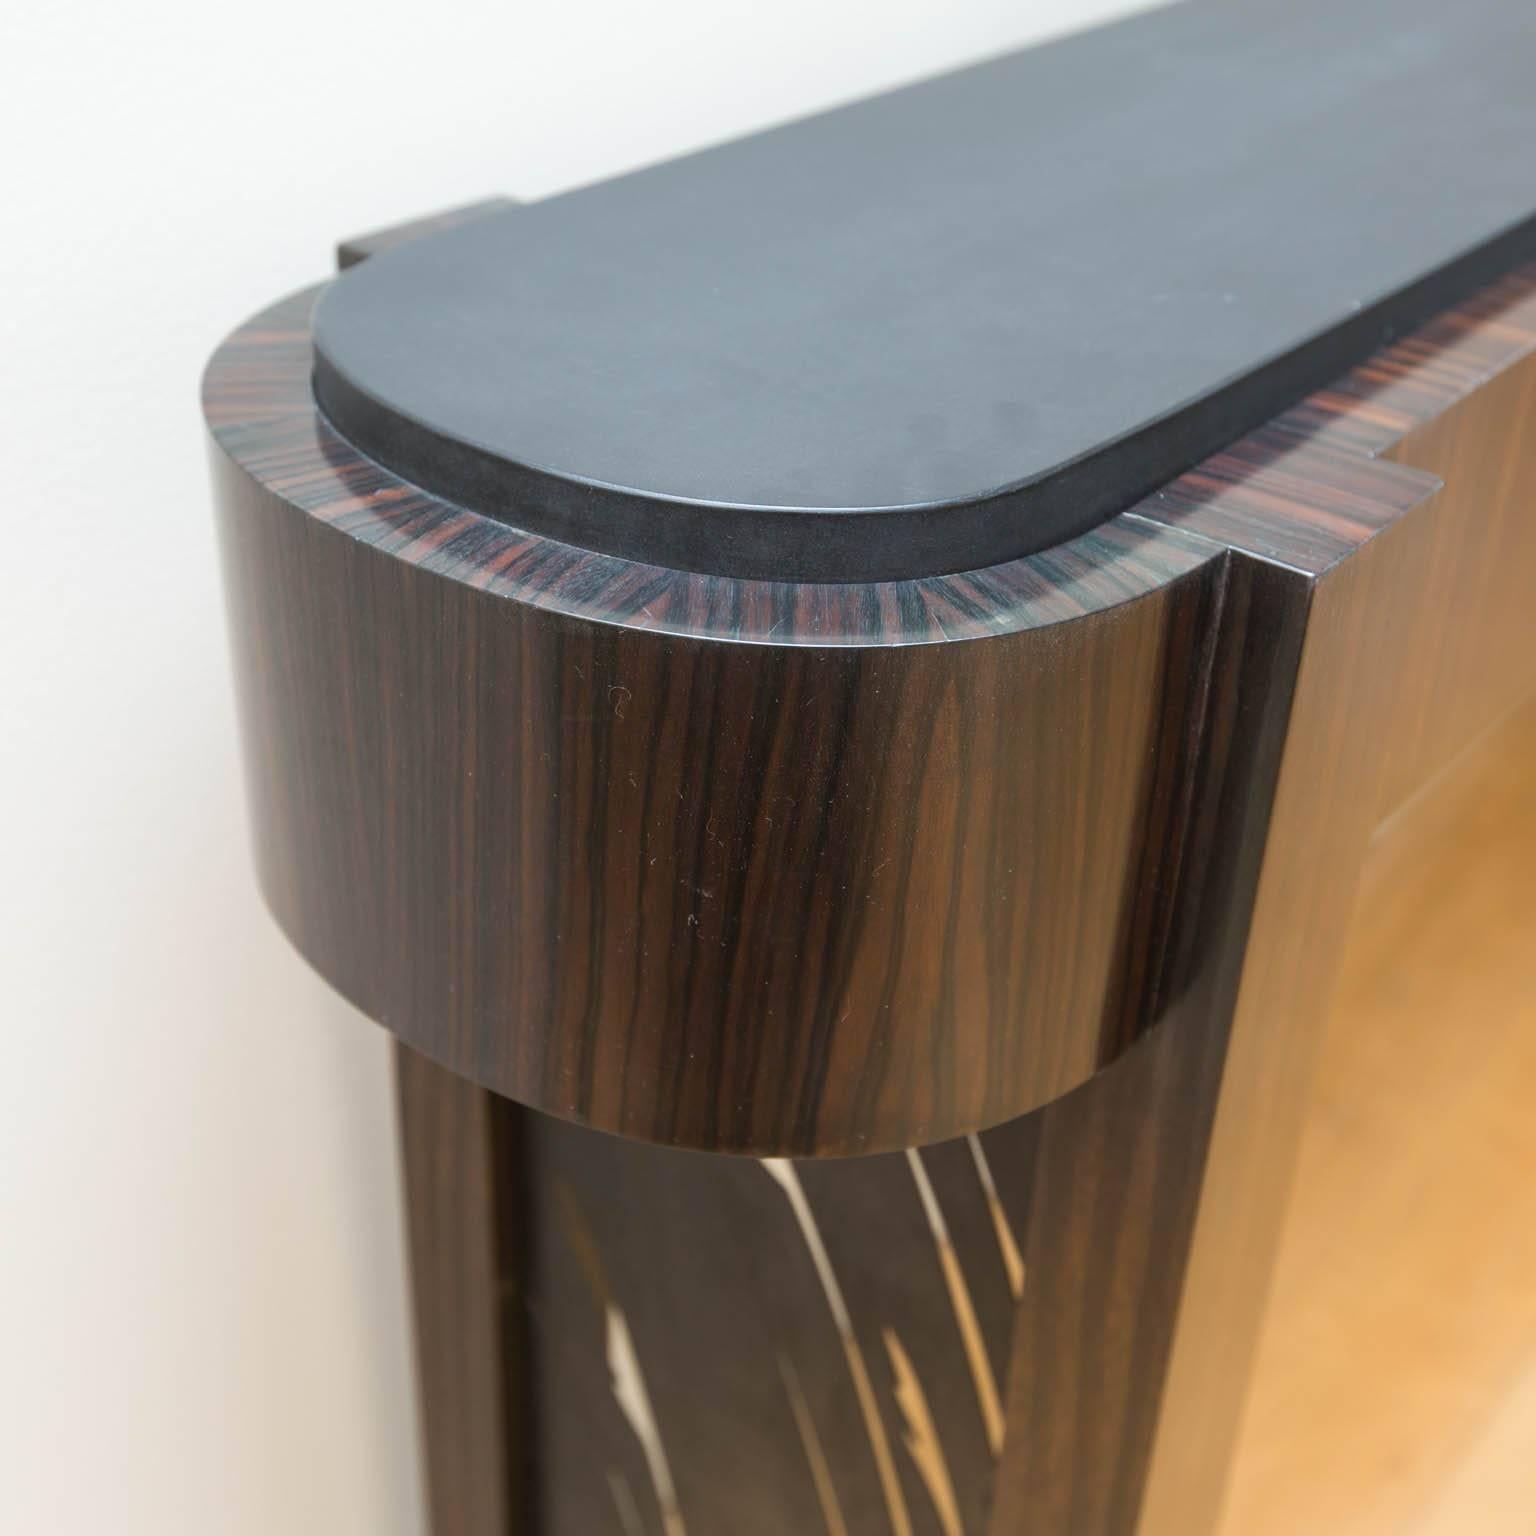 Black granite topped with Macassar ebony veneers and laser cut patinated steel insets. Handcrafted by master furniture maker Gregory Clark.